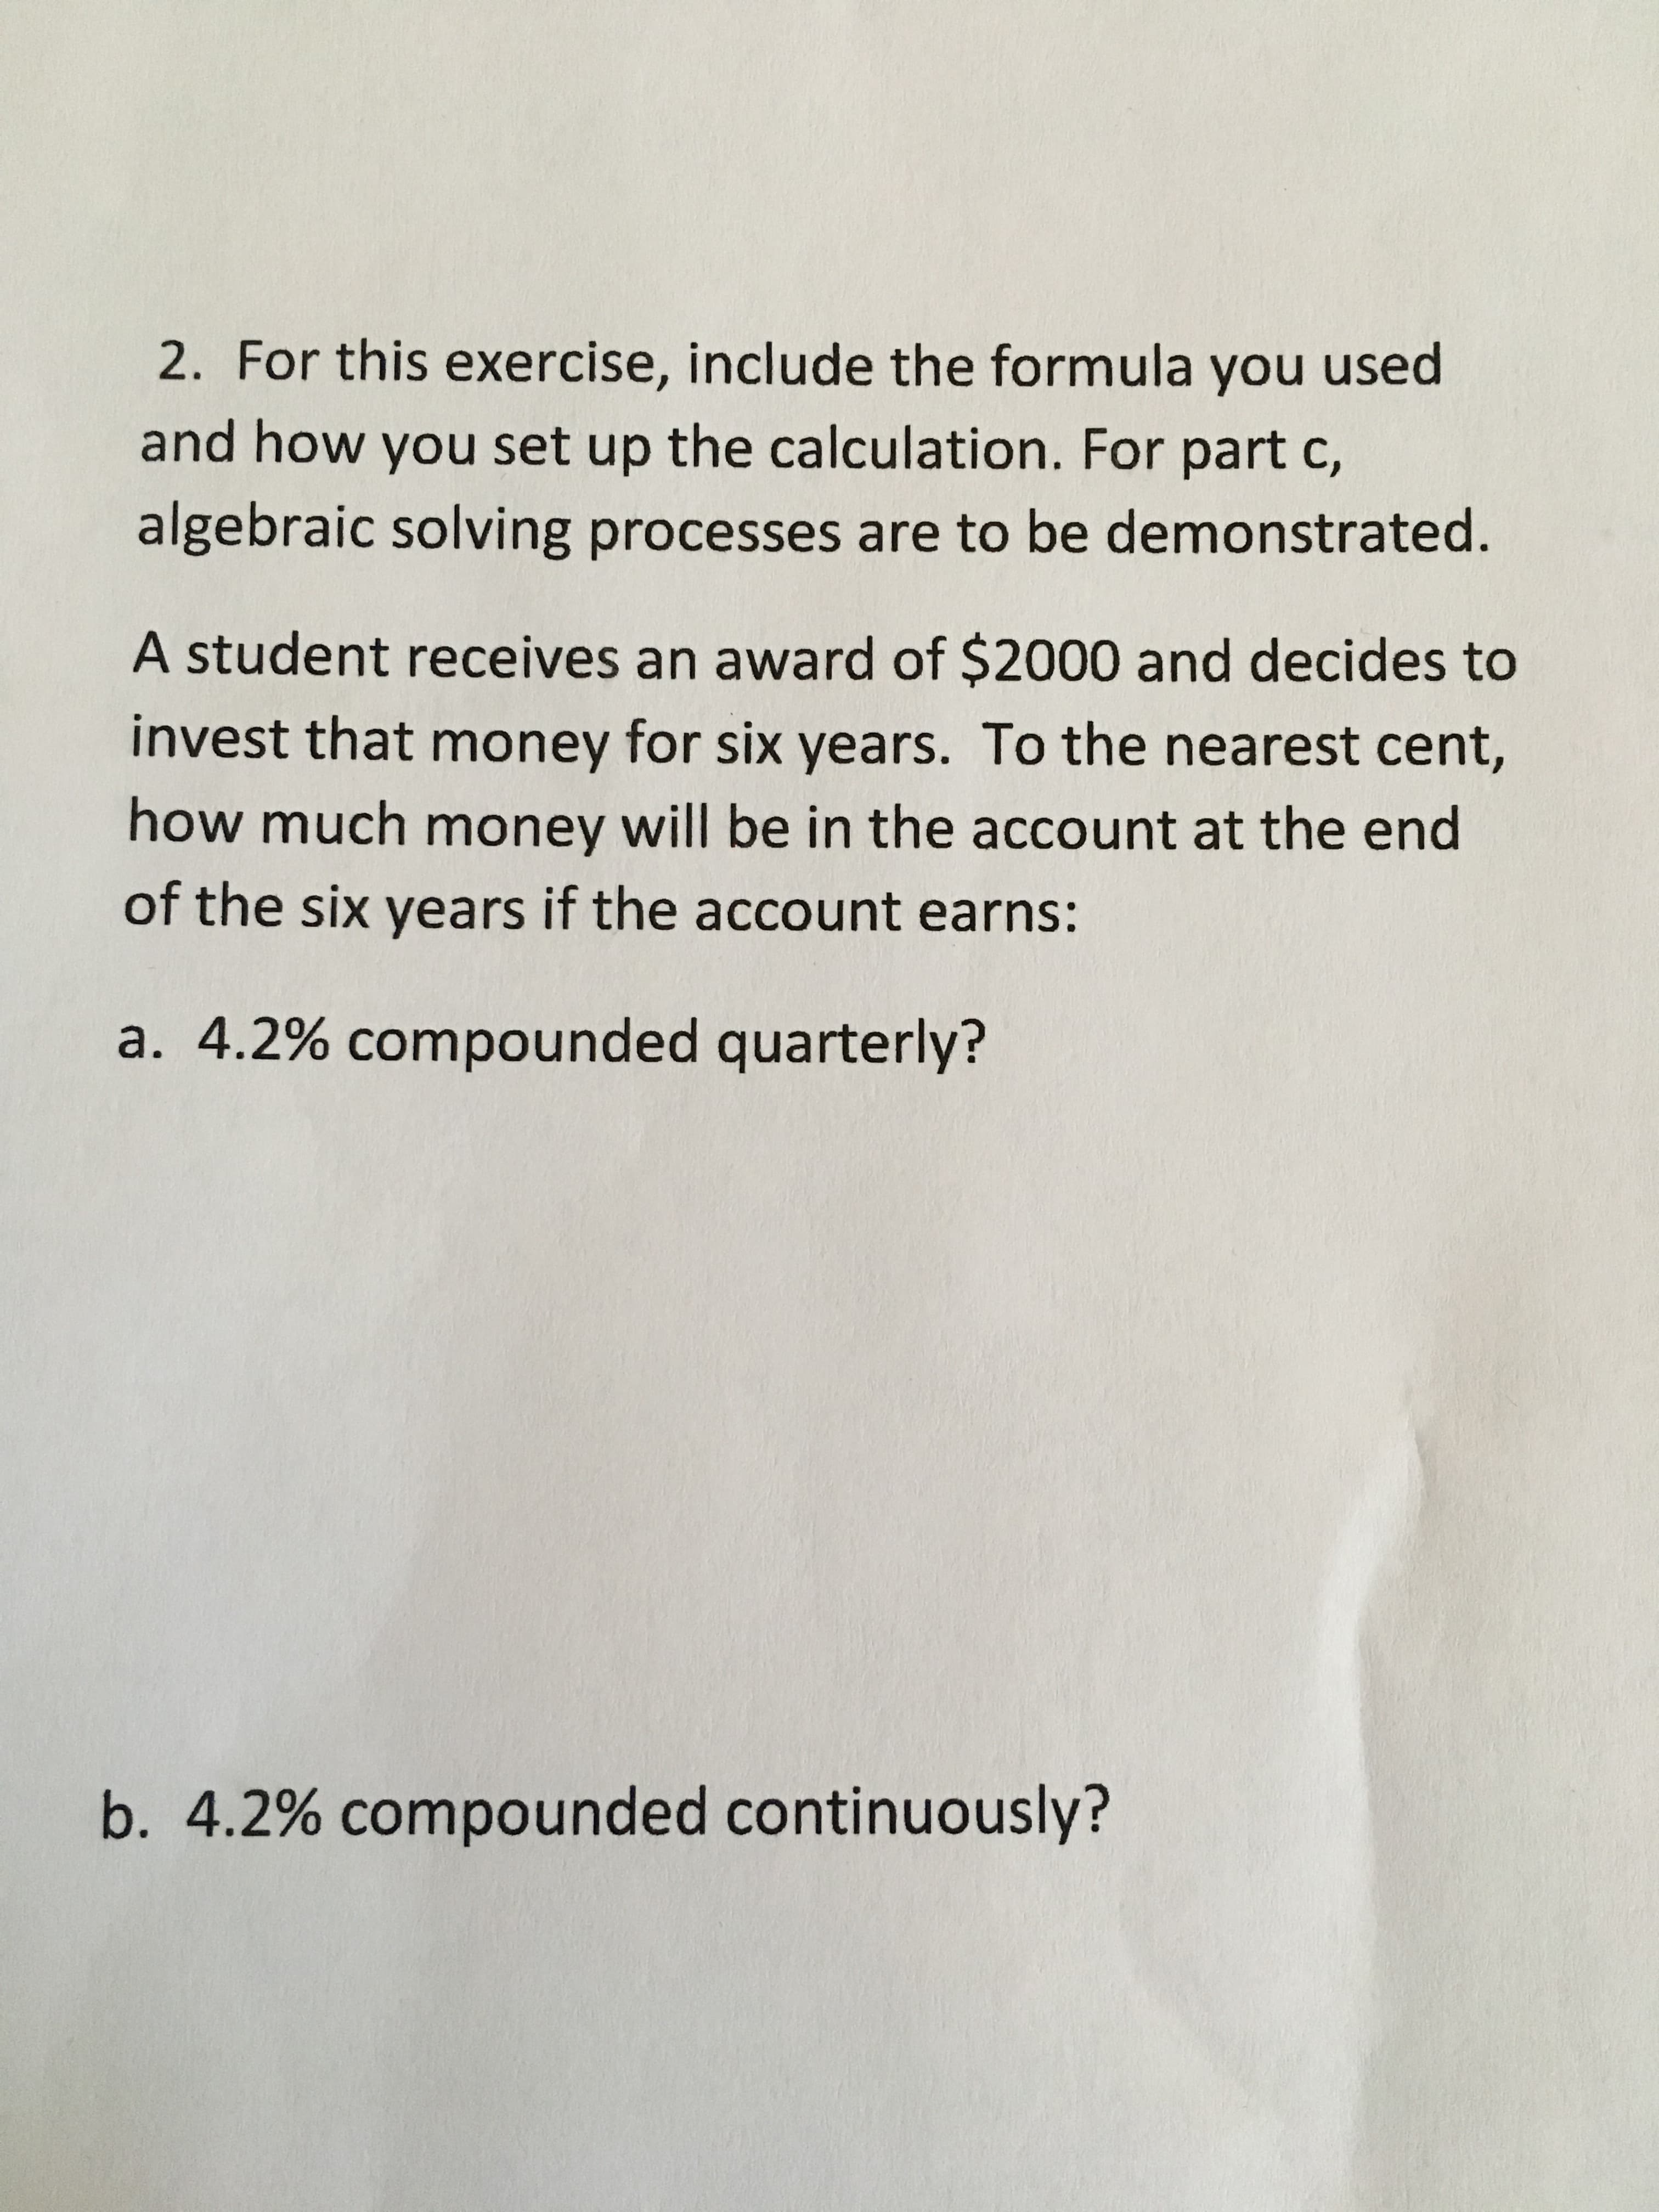 2. For this exercise, include the formula you used
and how you set up the calculation. For part c,
algebraic solving processes are to be demonstrated.
A student receives an award of $2000 and decides to
invest that money for six years. To the nearest cent,
how much money will be in the account at the end
of the six years if the account earns:
a. 4.2% compounded quarterly?
b. 4.2% compounded continuously?
